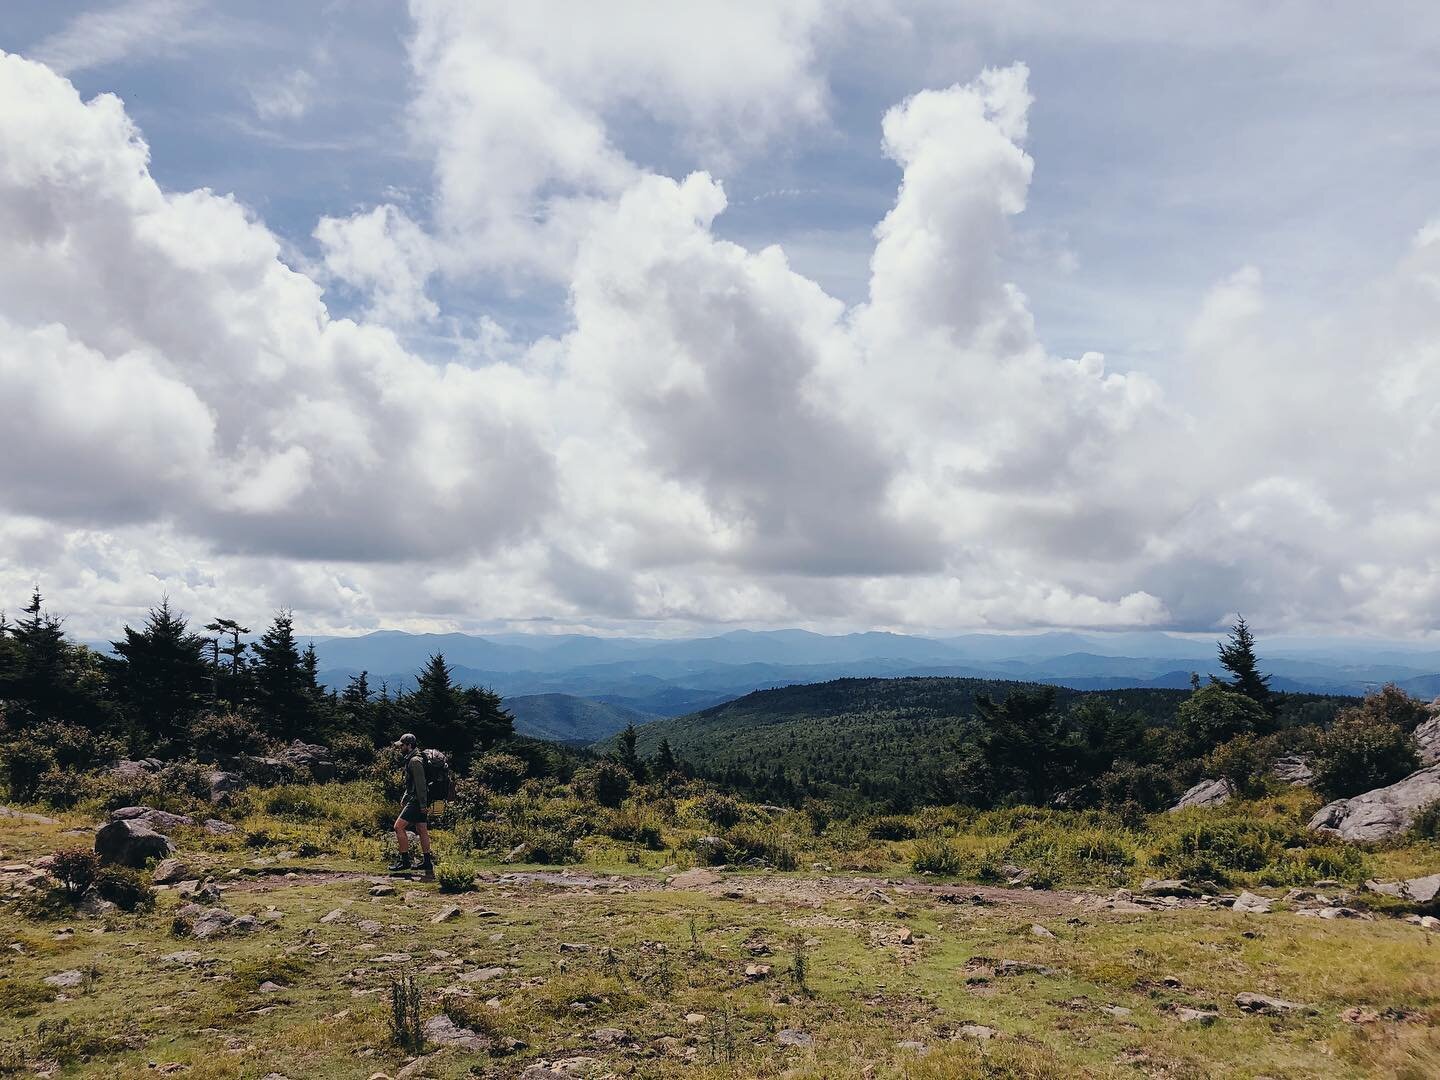 One of the best parts about living in the Charlotte area is how close you are to incredible views and hikes, not only in NC, but anywhere from GA up to WV. Grayson Highlands in VA is a short 2.5 hour trip from Charlotte with some of the best @appalac